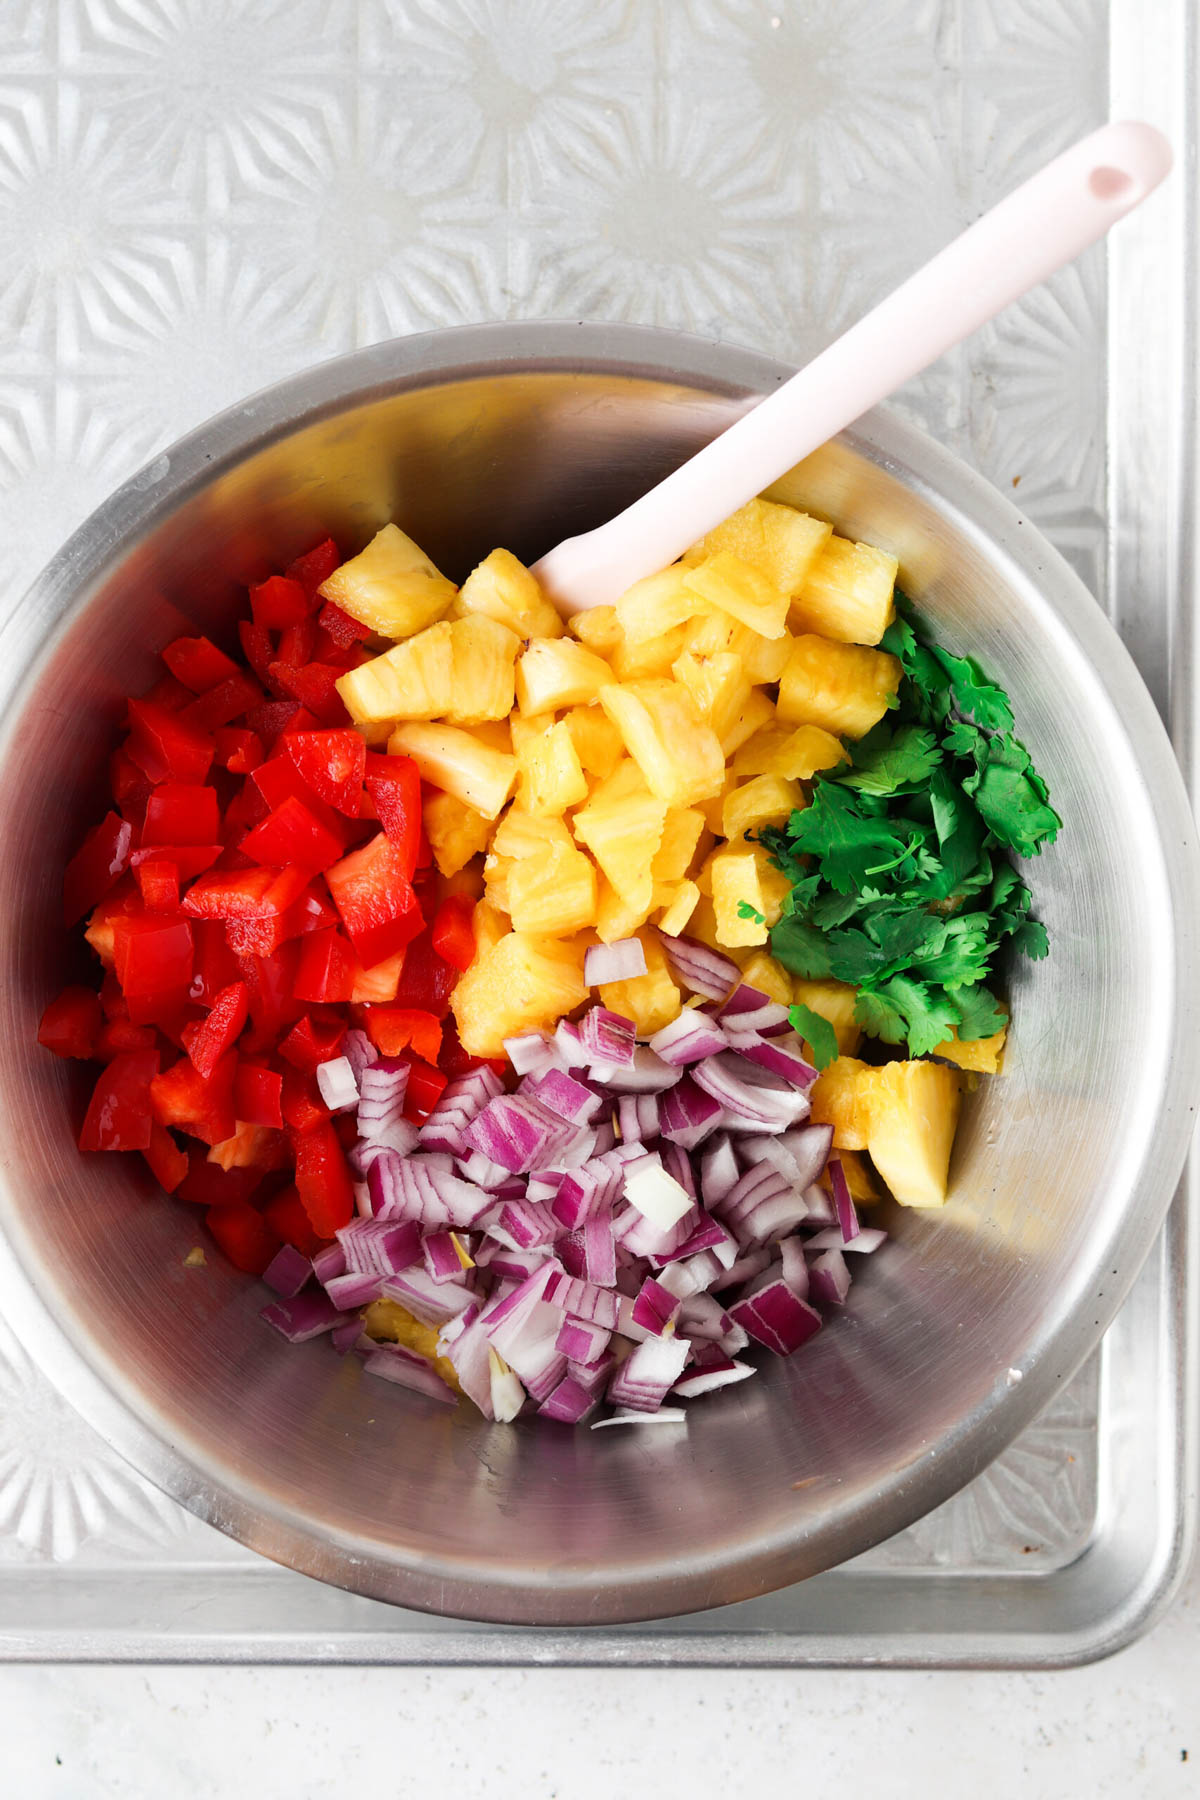 Tropical pico de gallo ingredients chopped in a mixing bowl.